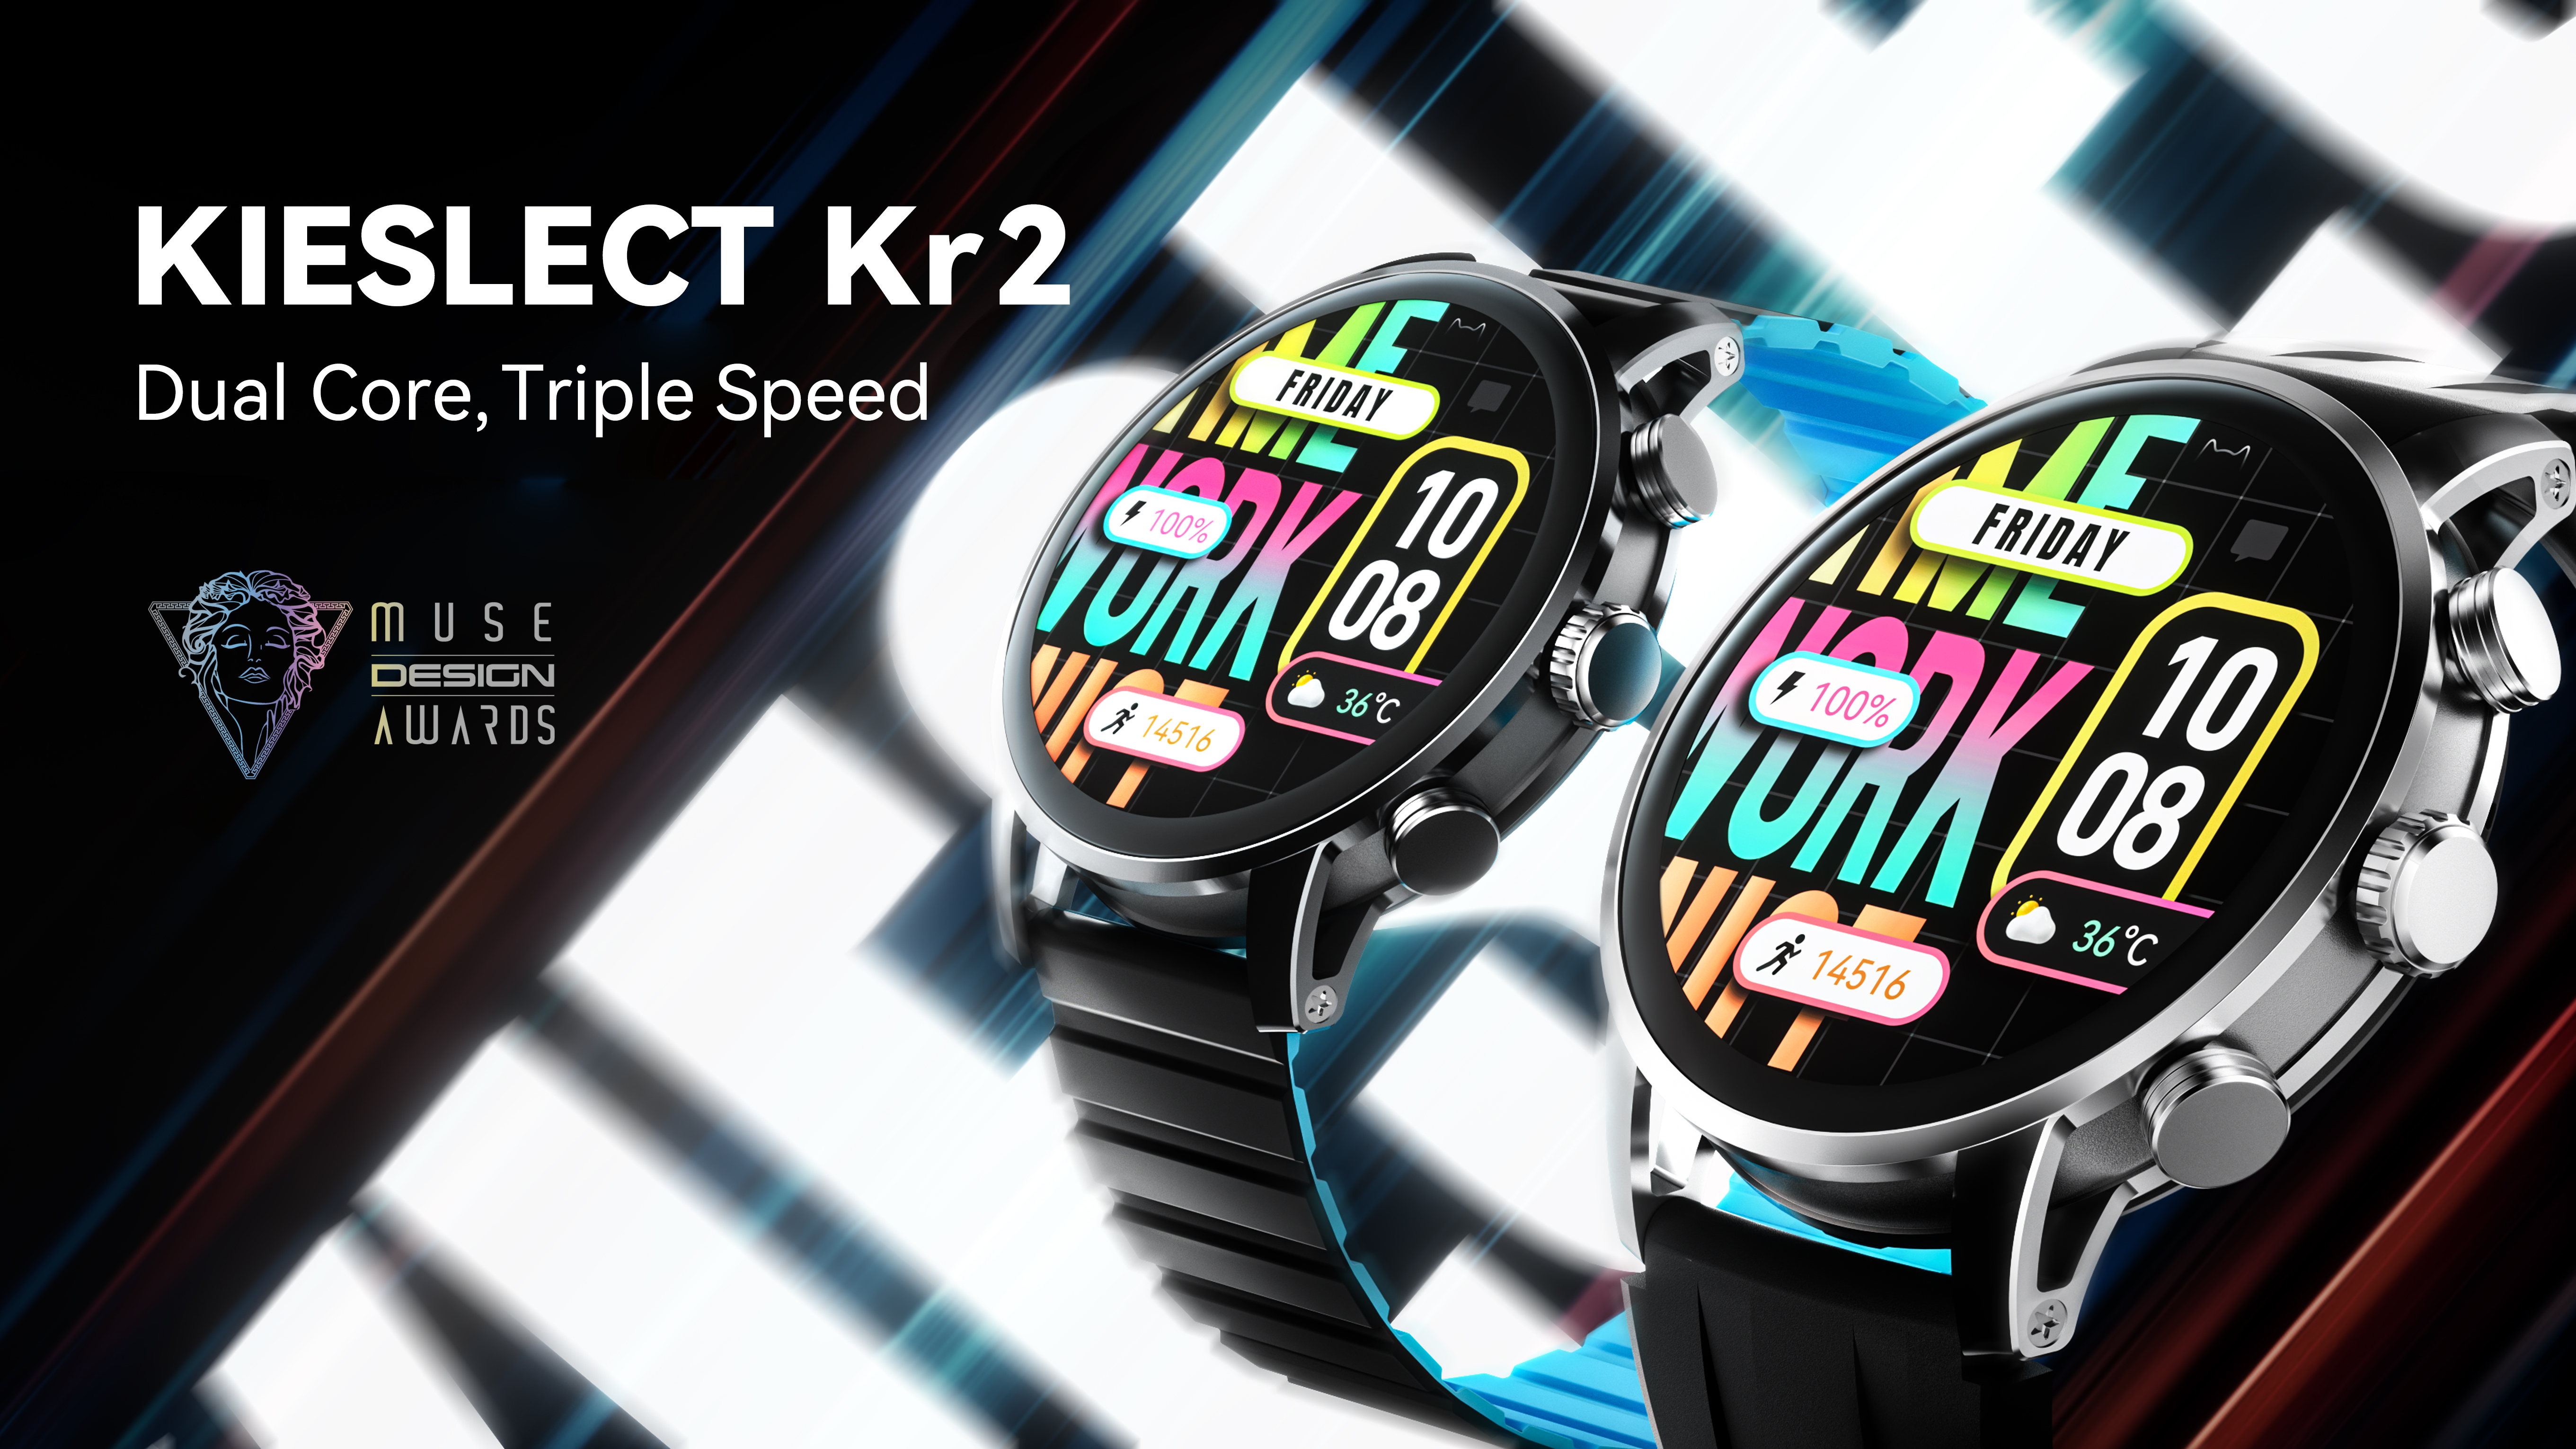 The Kieslect Kr2 Launches with “Dual Core, Triple Speed” Technology, a 2.5D GPU Super Dynamic Display, and much, much more.